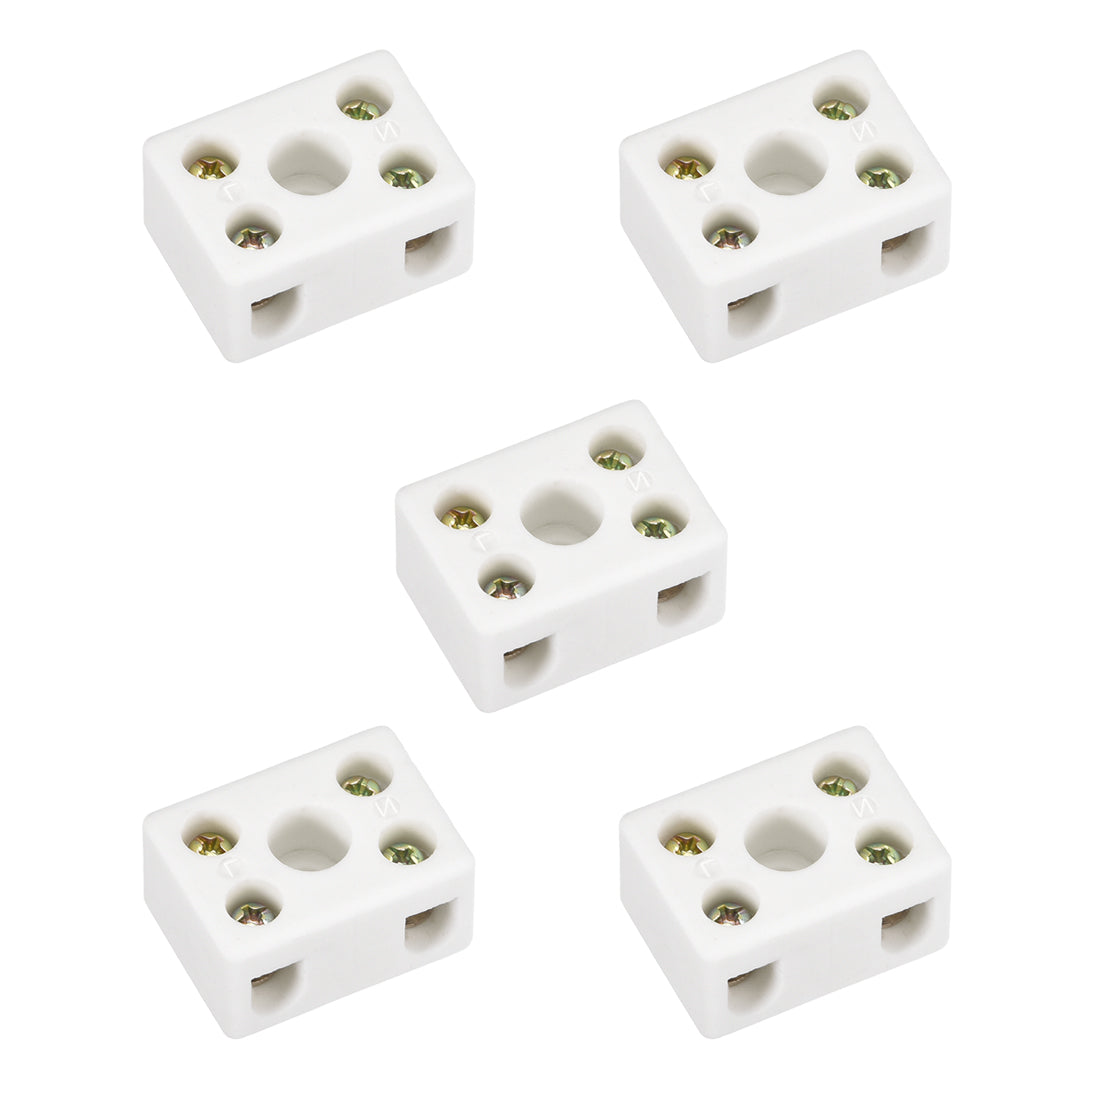 uxcell Uxcell 2 Way Ceramics Terminal Blocks High Temp Porcelain Ceramic Connectors 29.2x21.2x15.2mm for Electrical Wire Cable 5 Pcs